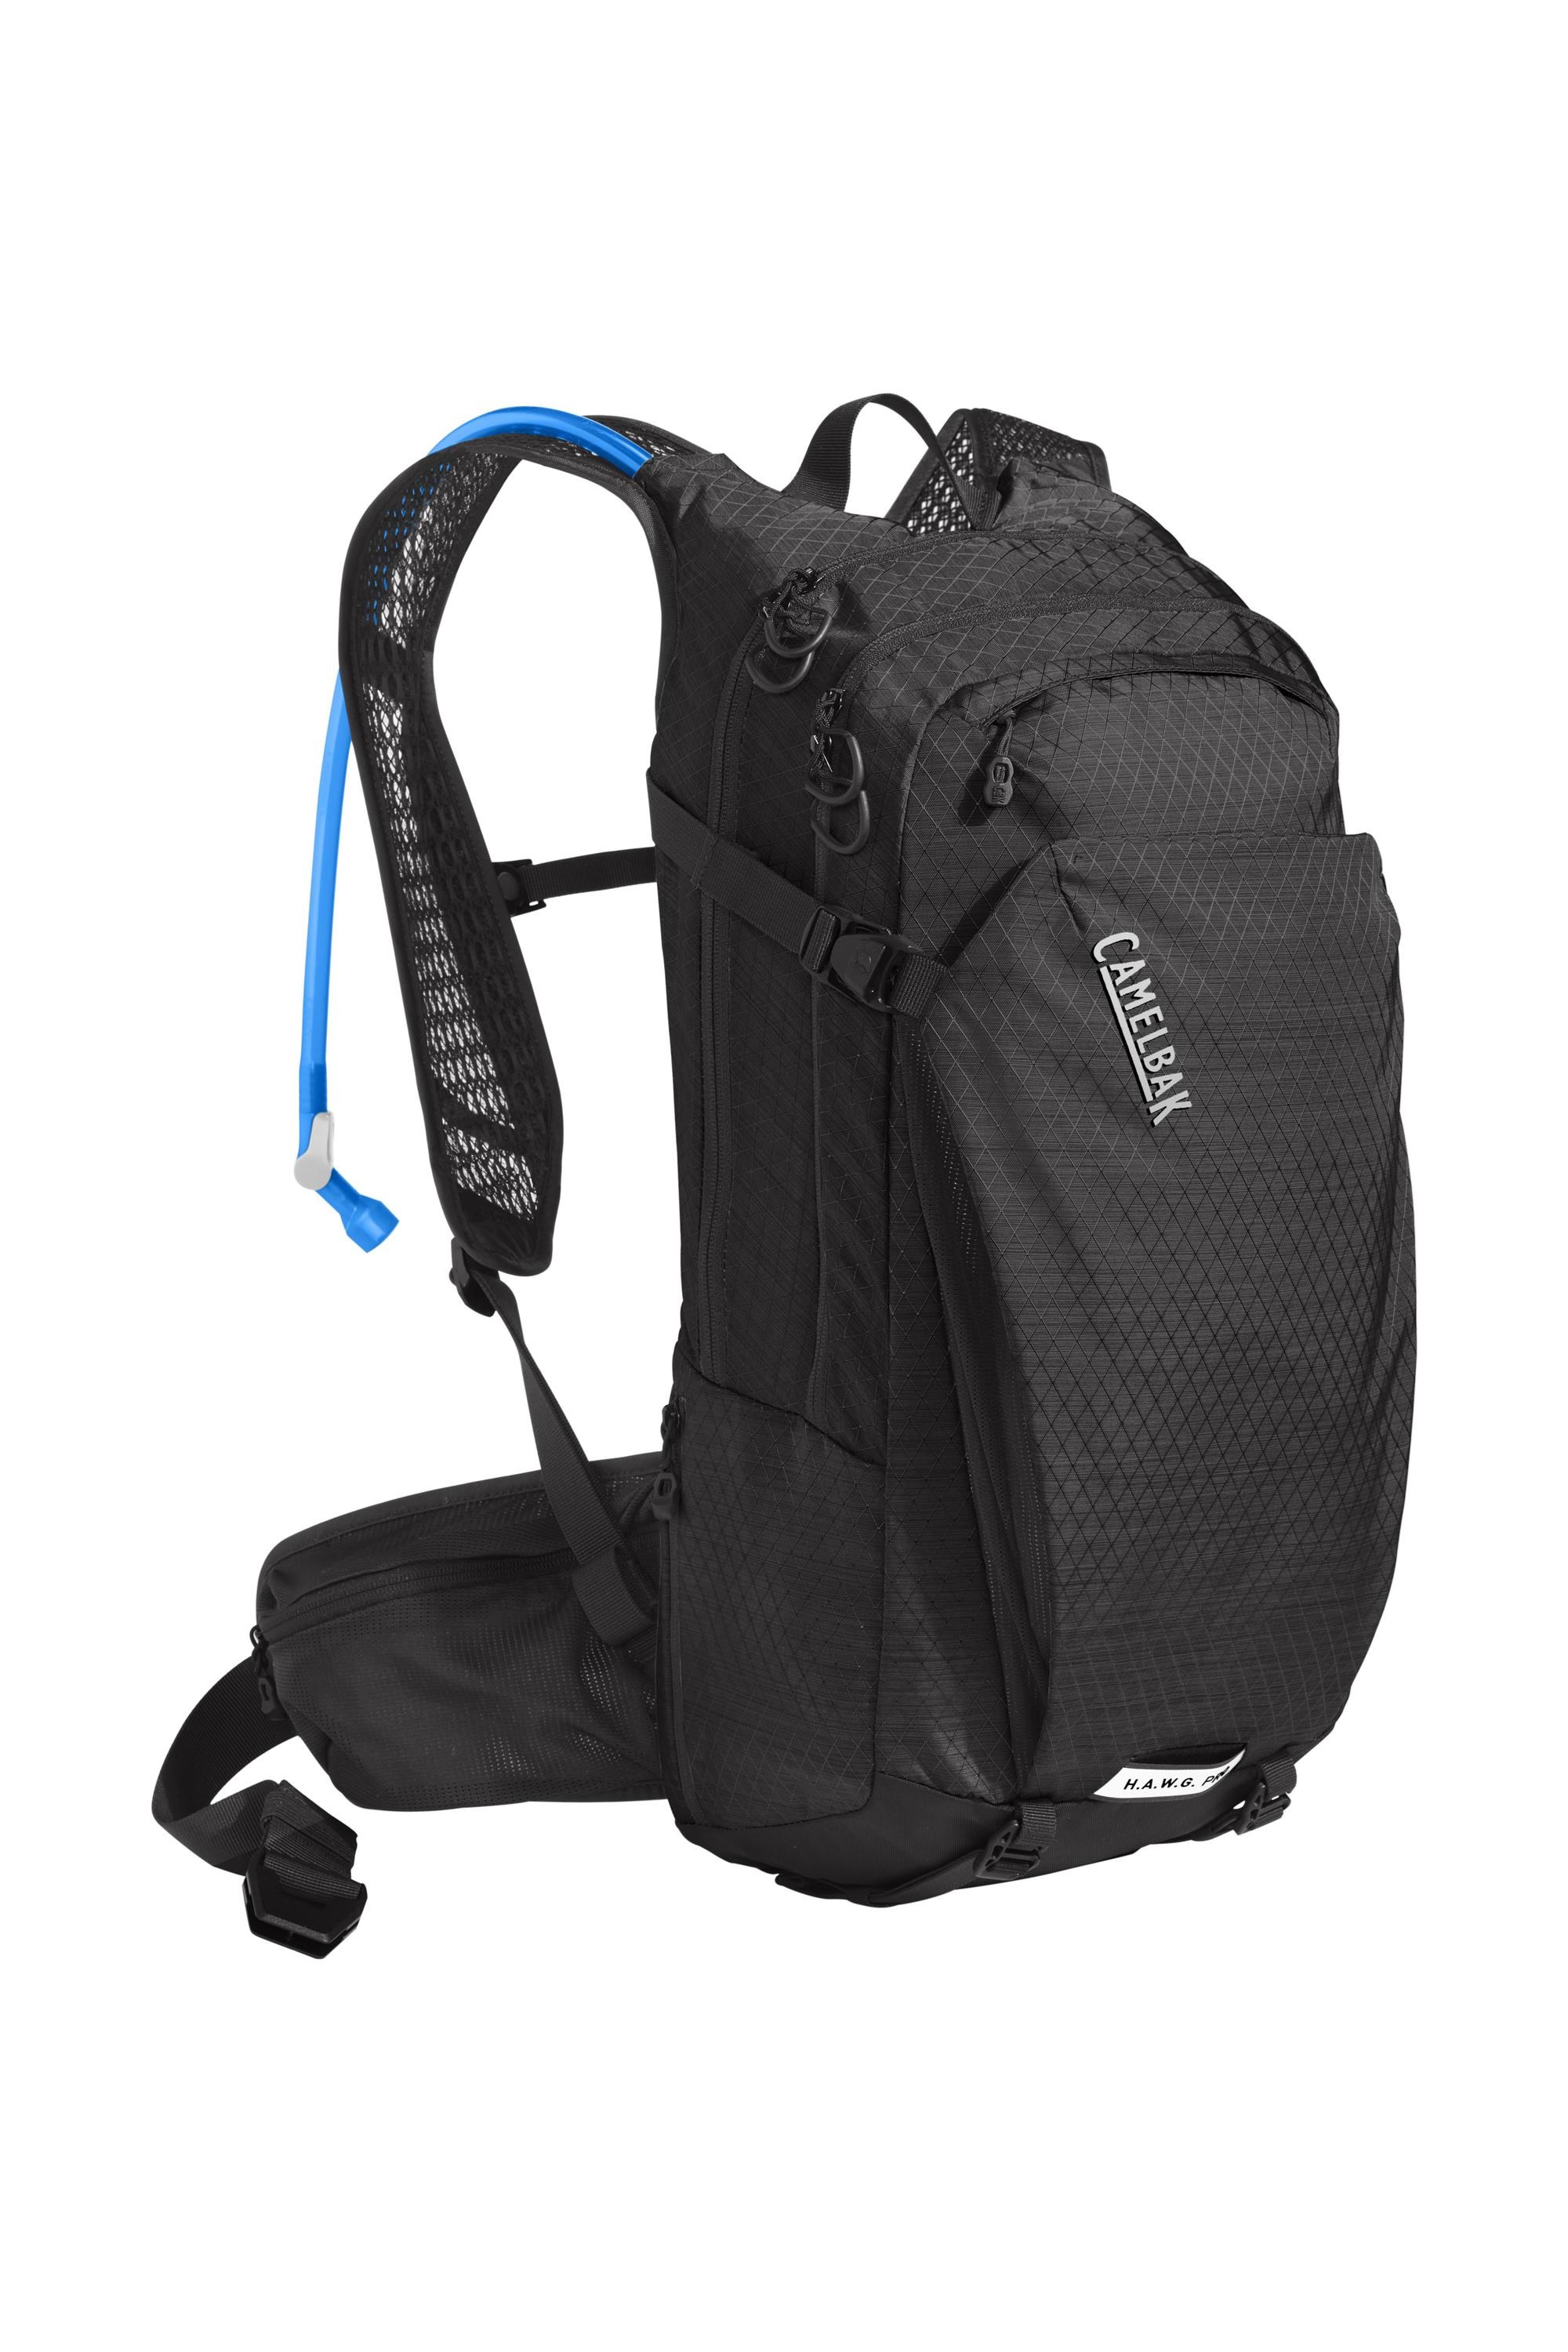 H. A.w. G. Pro Hydration Pack 20l With 3l Reservoir -